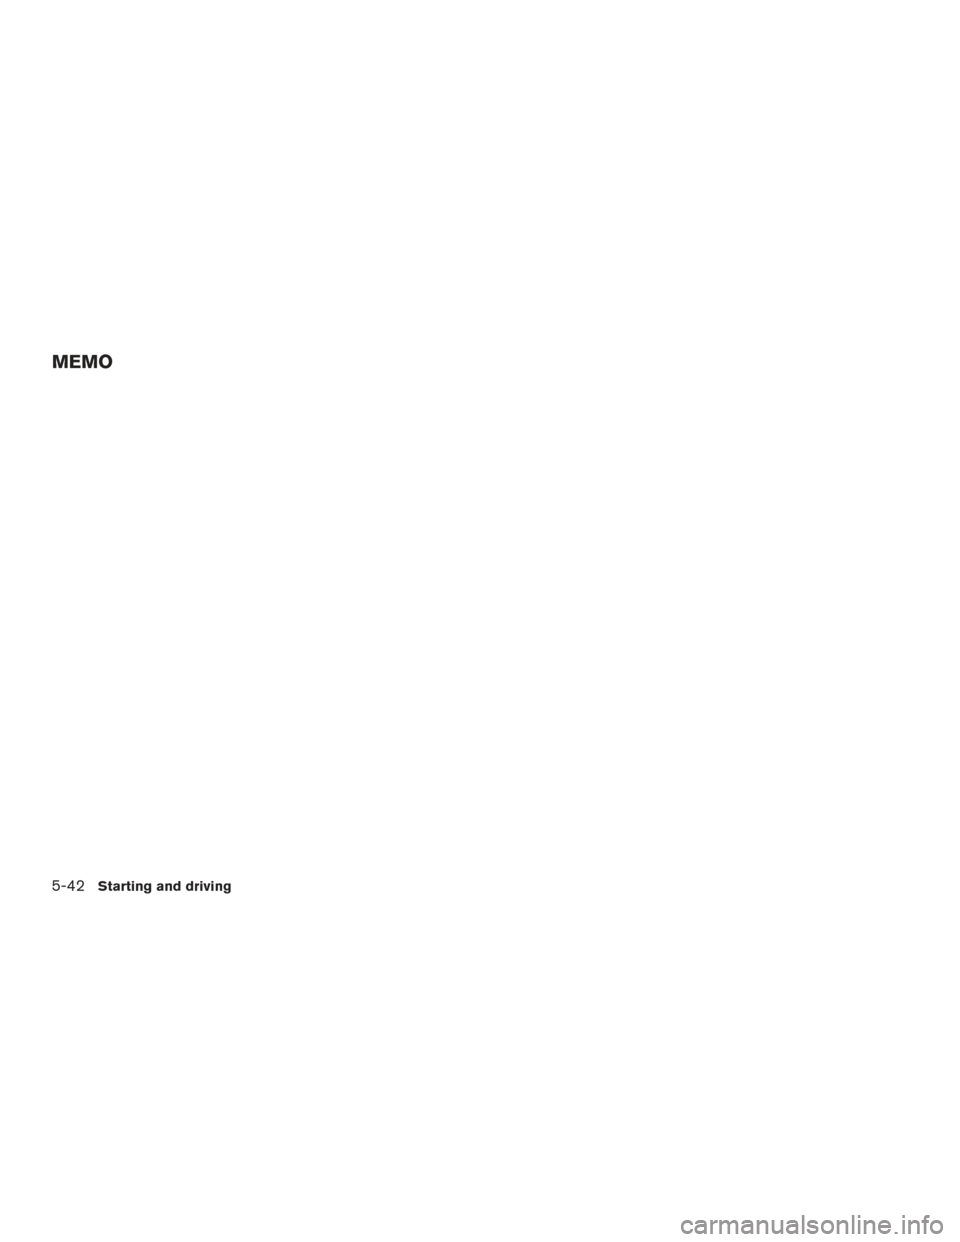 NISSAN ALTIMA 2015 L33 / 5.G Owners Manual MEMO
5-42Starting and driving 